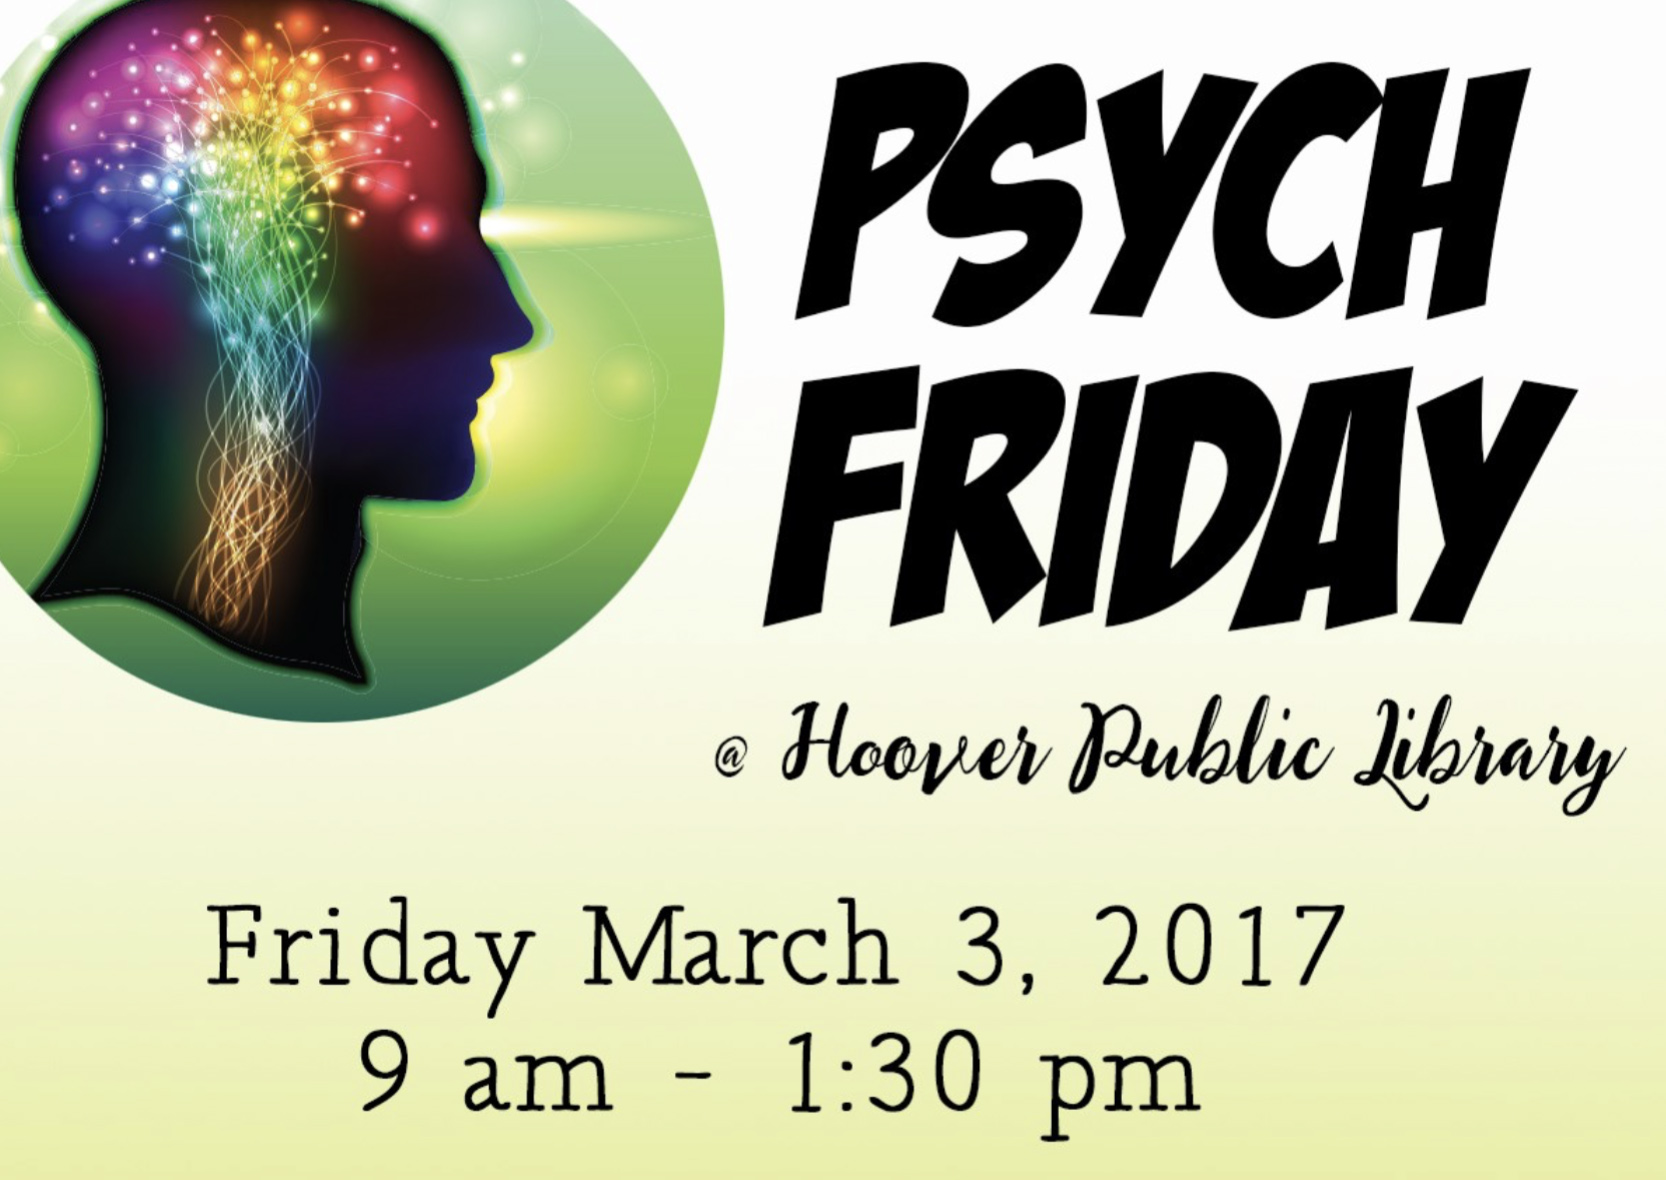 Psych Friday at Hoover Public Library